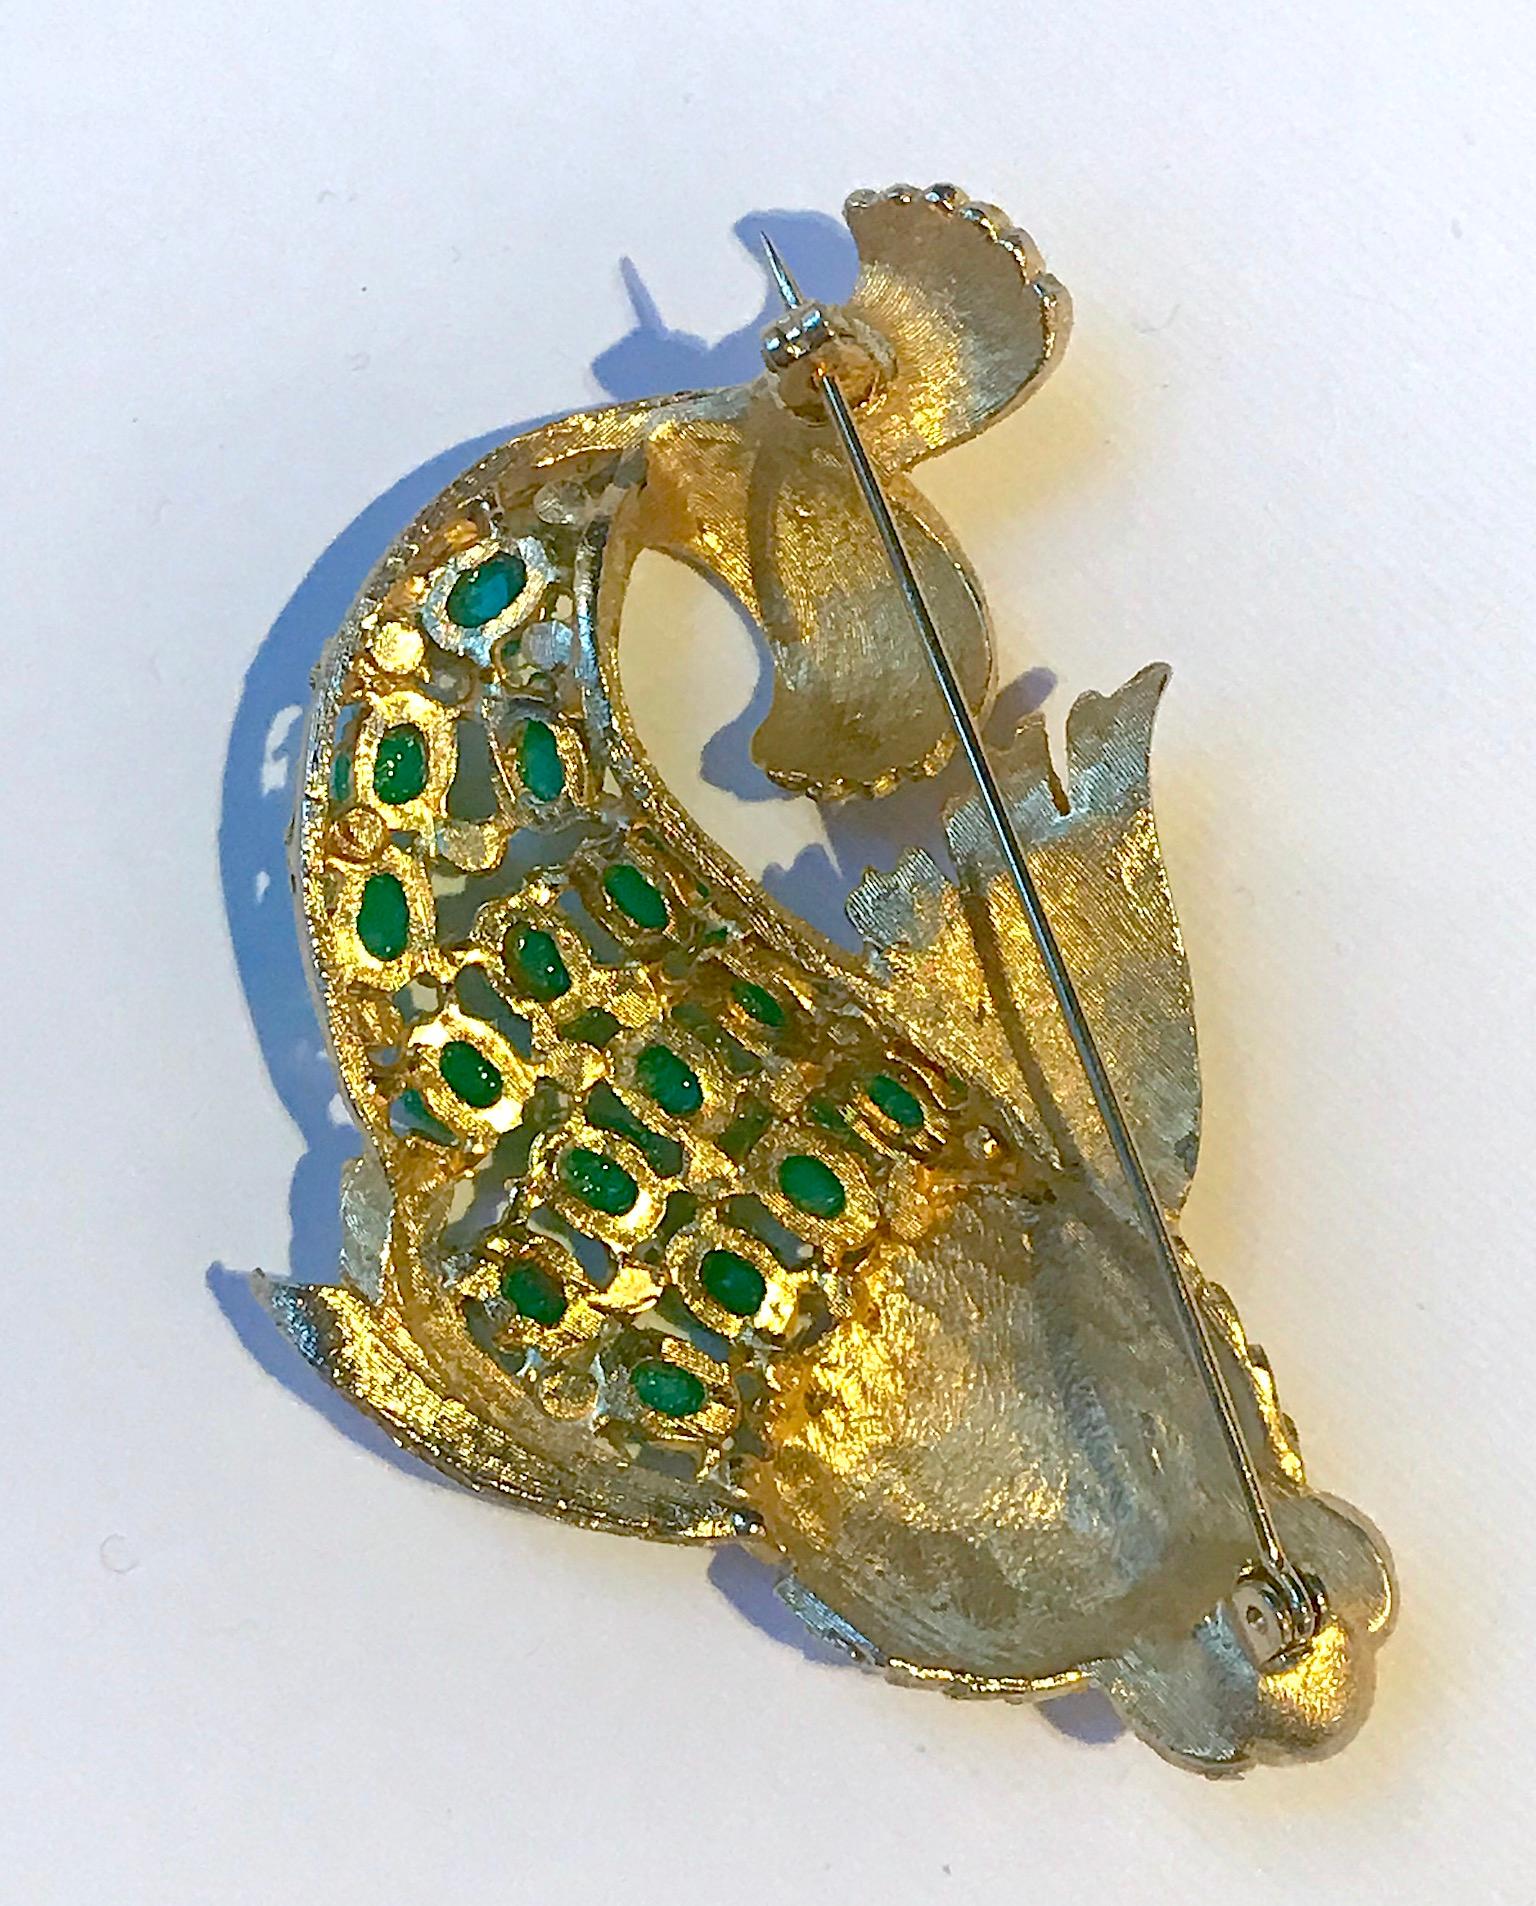 1950s Satin Gold Figural Brooch of Fish with Green Cabochon 7